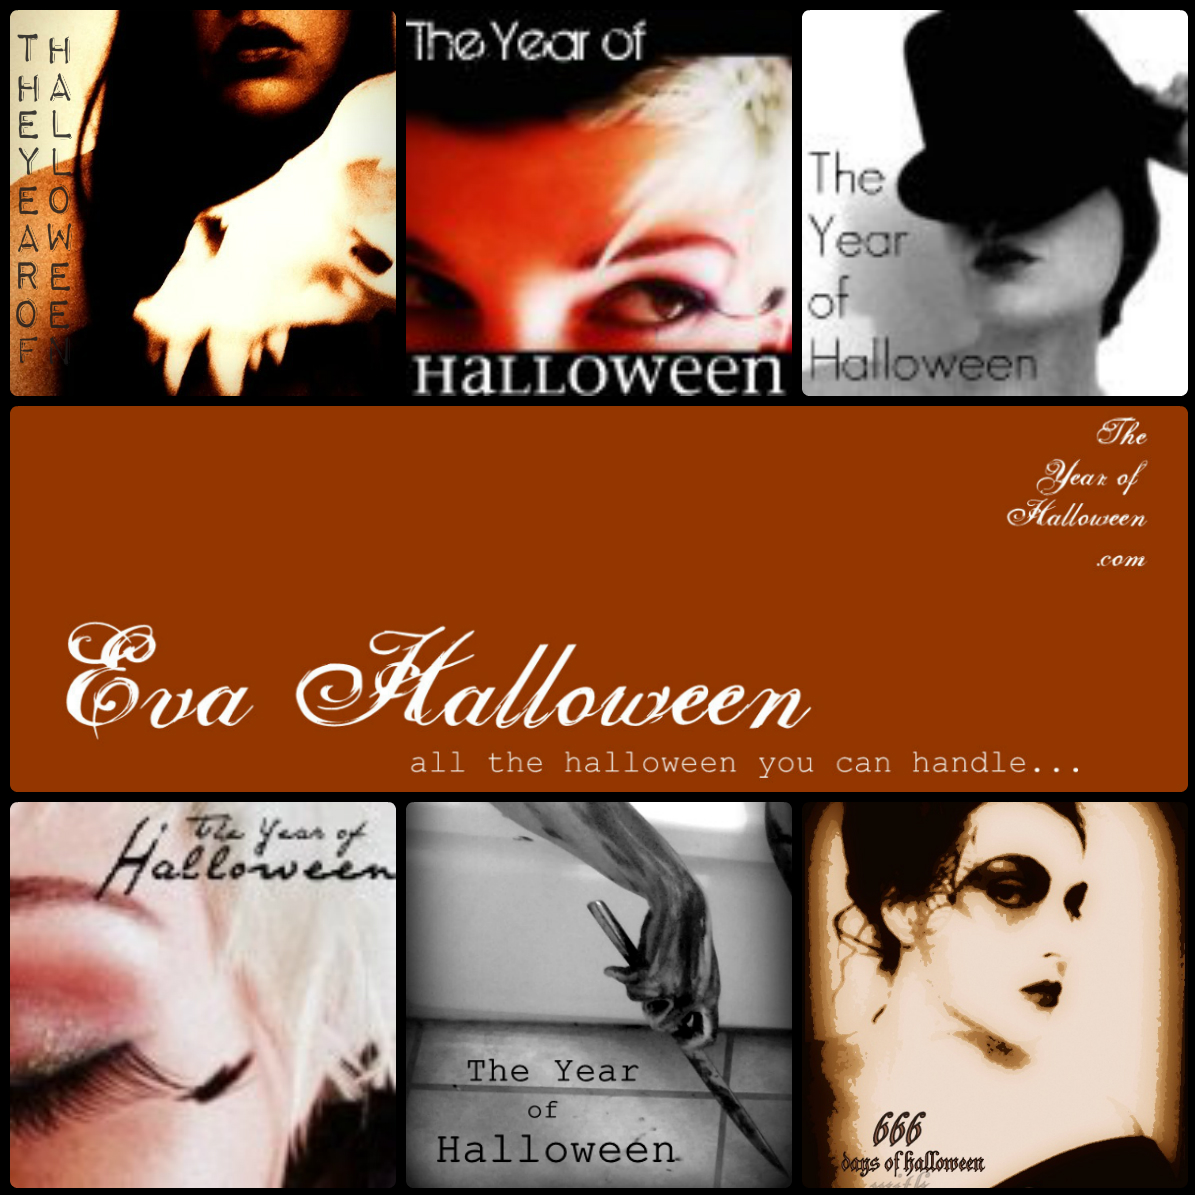 The Year of Halloween